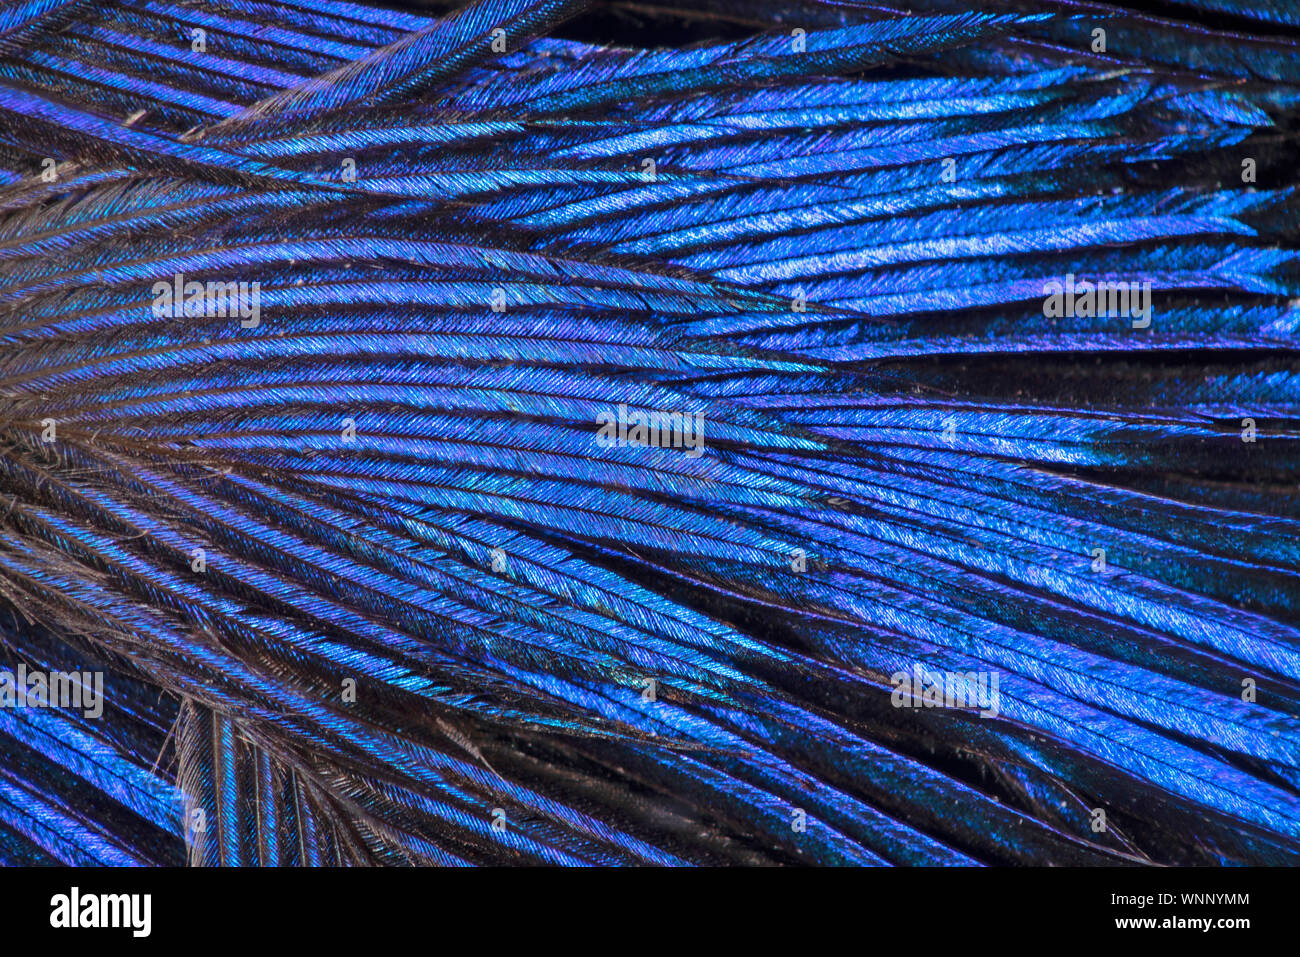 Bird feather detail showing blue iridescence (also known as goniochromism) Stock Photo